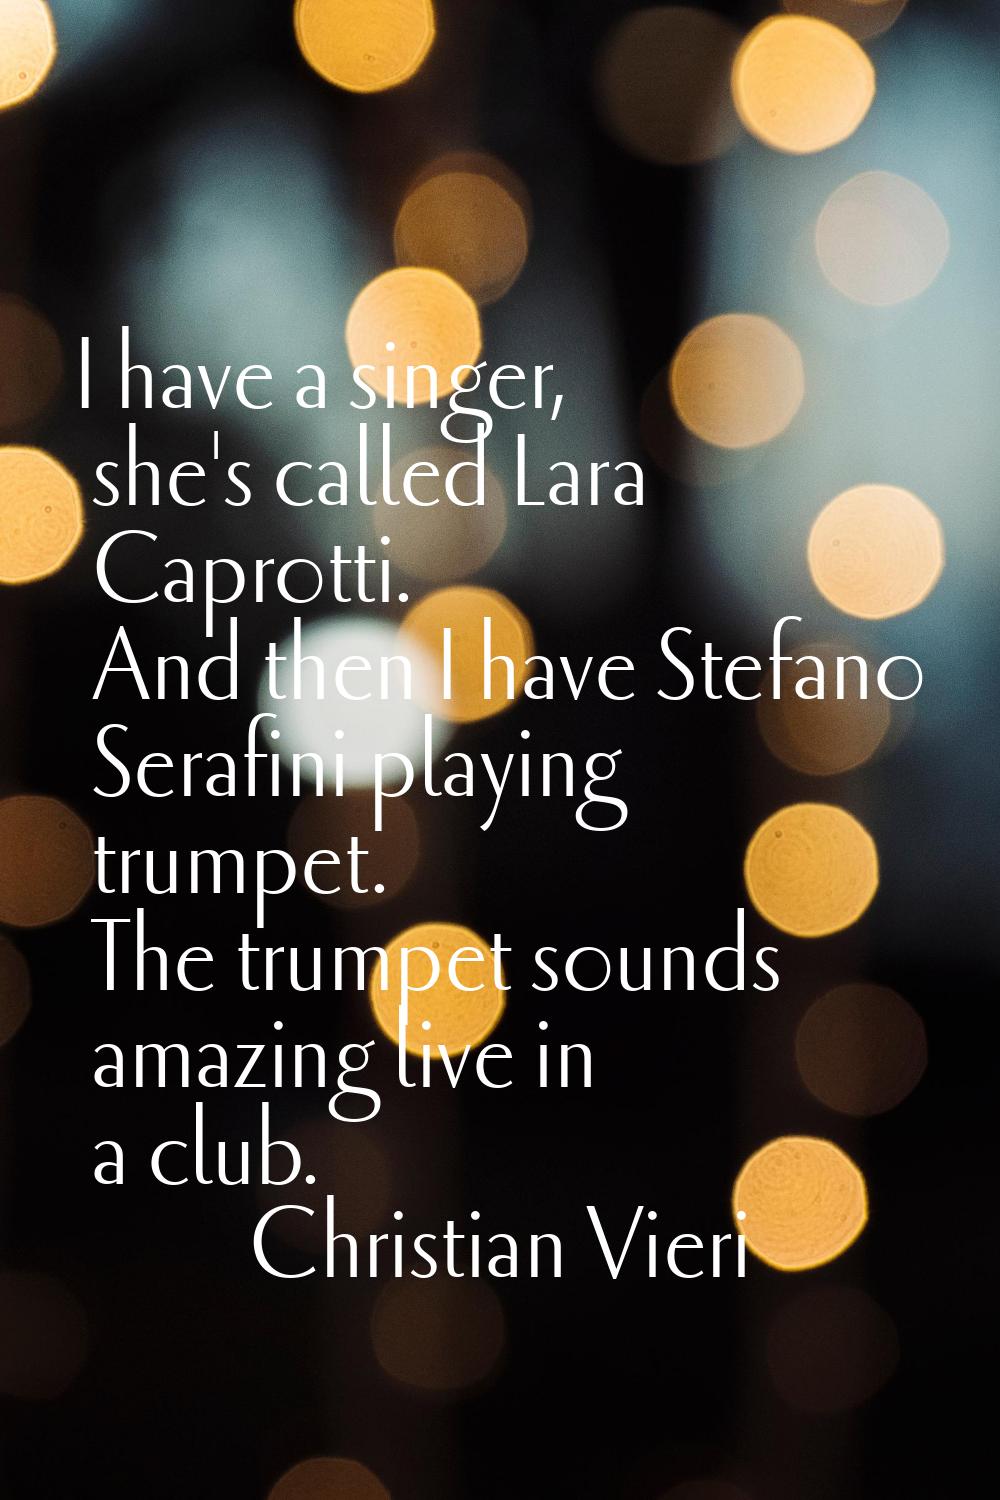 I have a singer, she's called Lara Caprotti. And then I have Stefano Serafini playing trumpet. The 